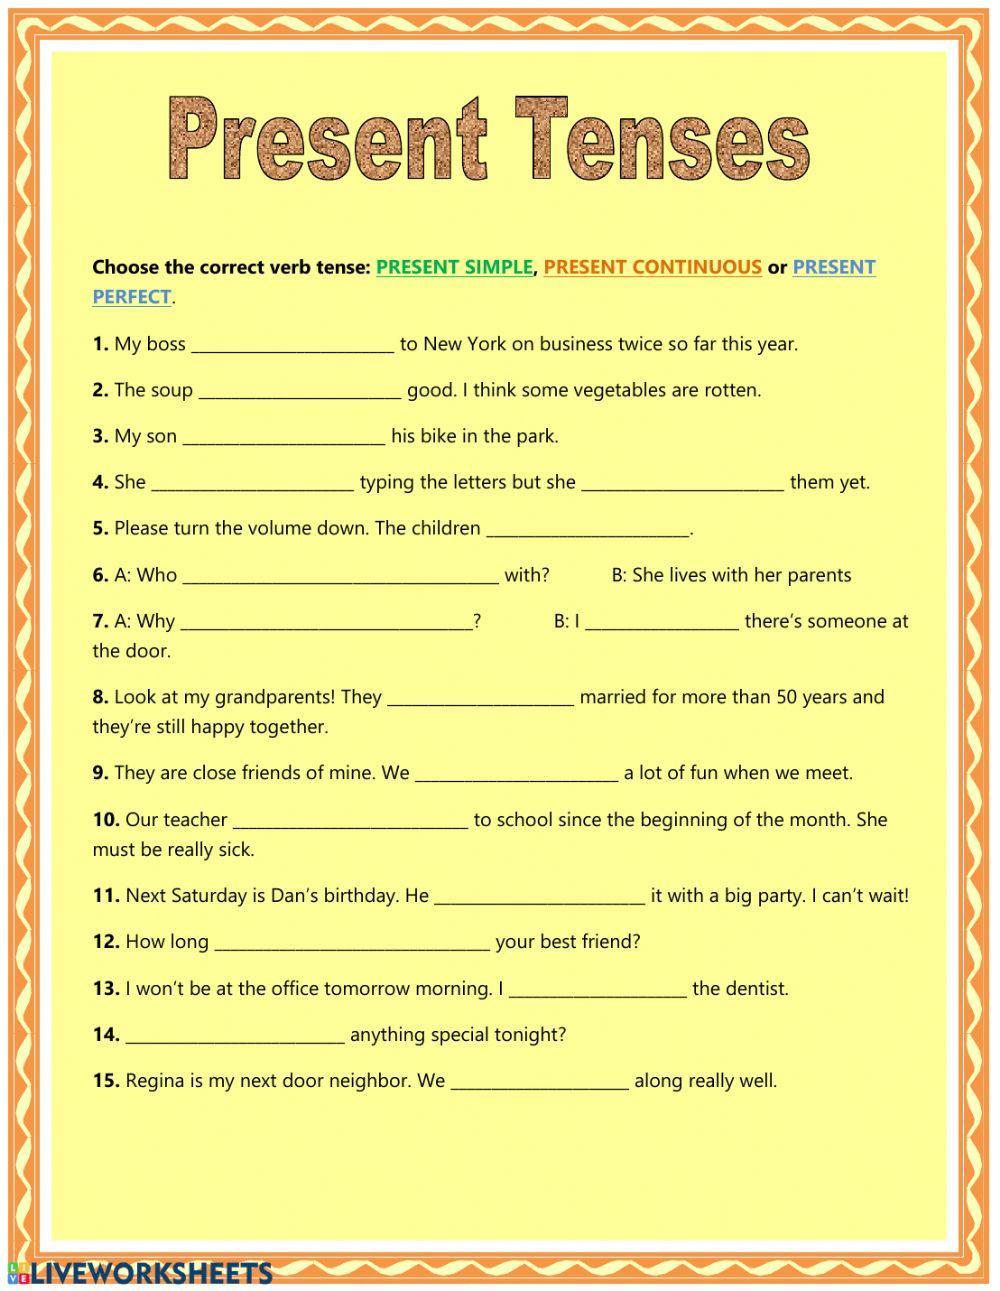 Choose the correct past tense. Present perfect simple for Tenses. Mixed Tenses exercises Intermediate упражнения. Past perfect and past simple Tenses exercise. Present perfect simple Tense exercise.